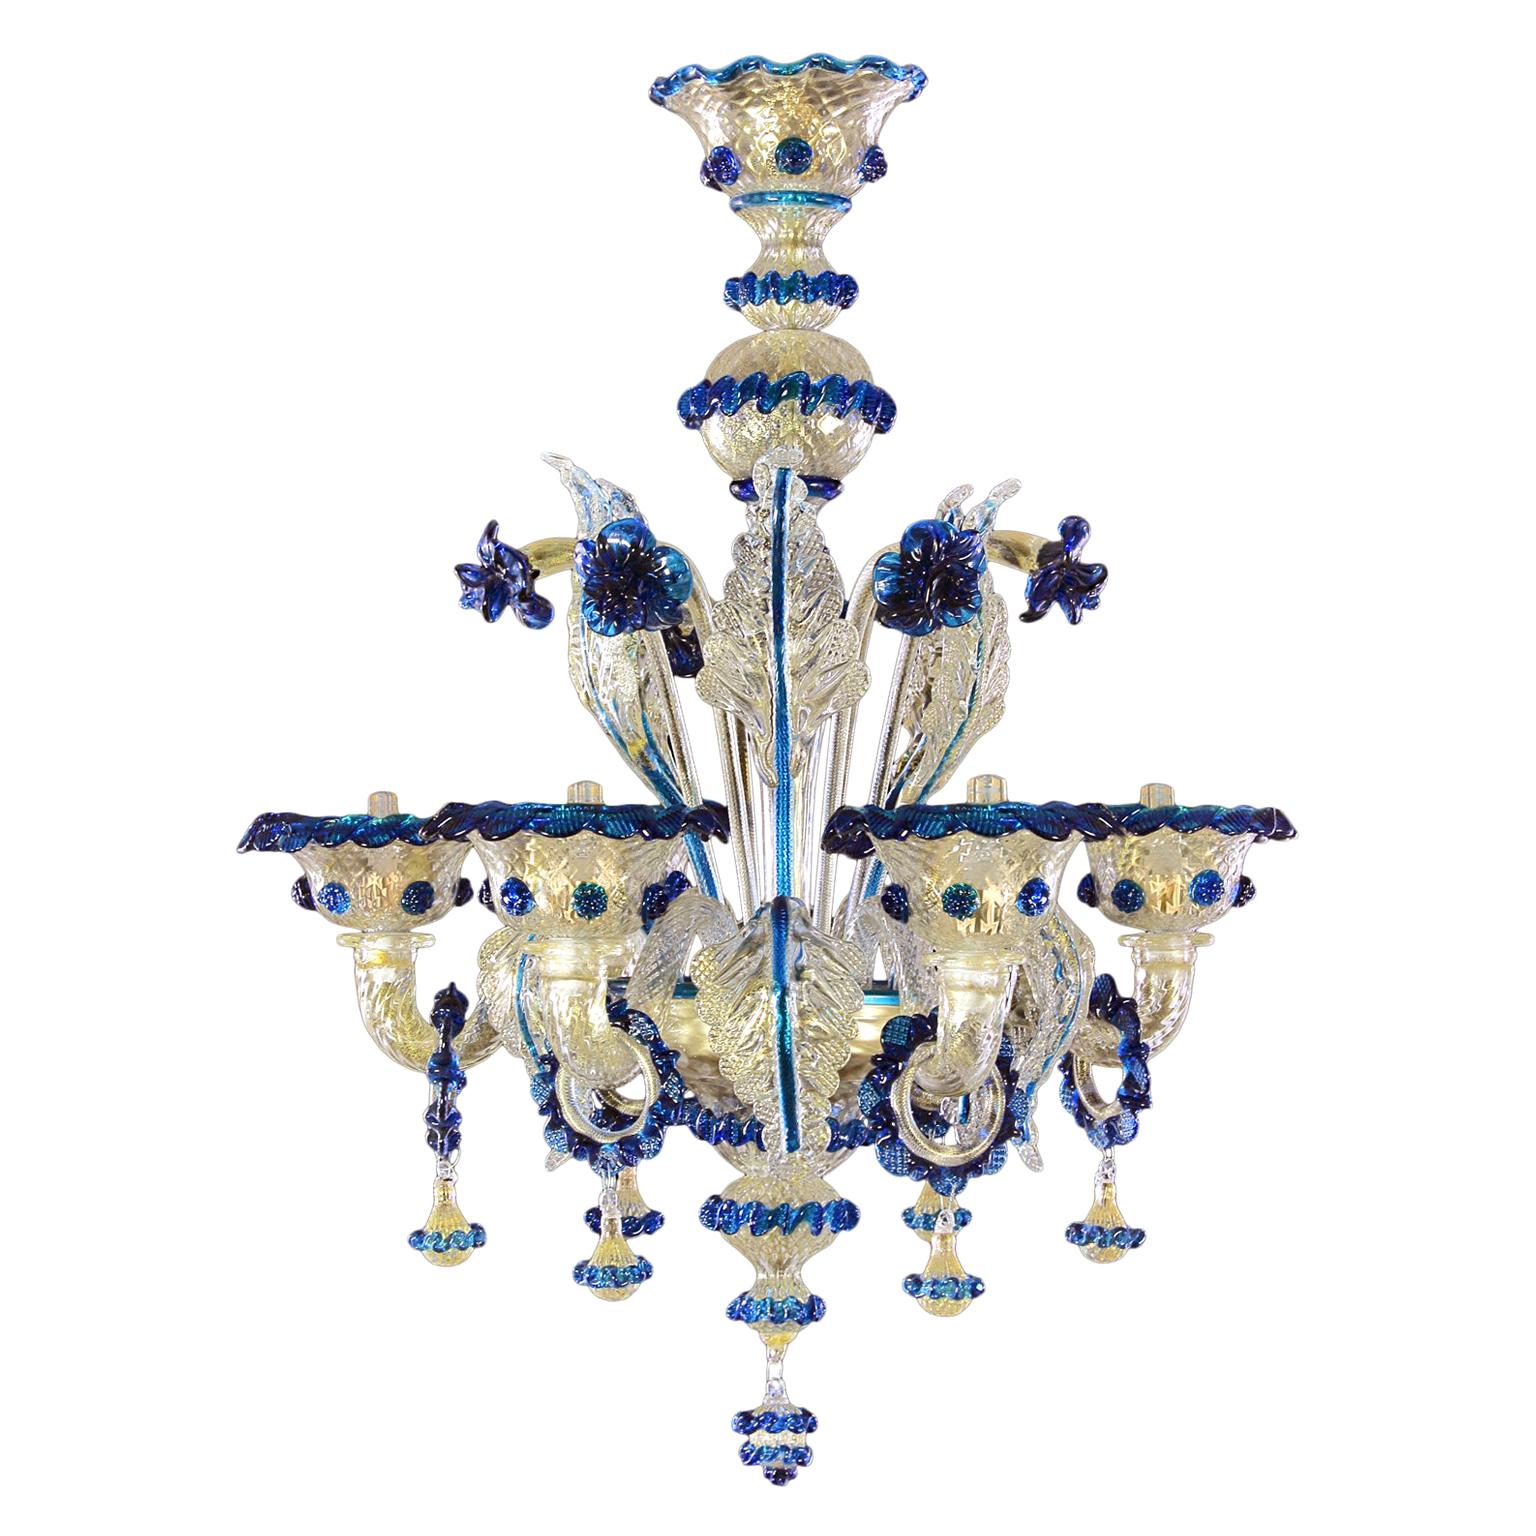 Artistic Rich Chandelier, 6 Arms Gold Murano Glass Blue Details by Multiforme